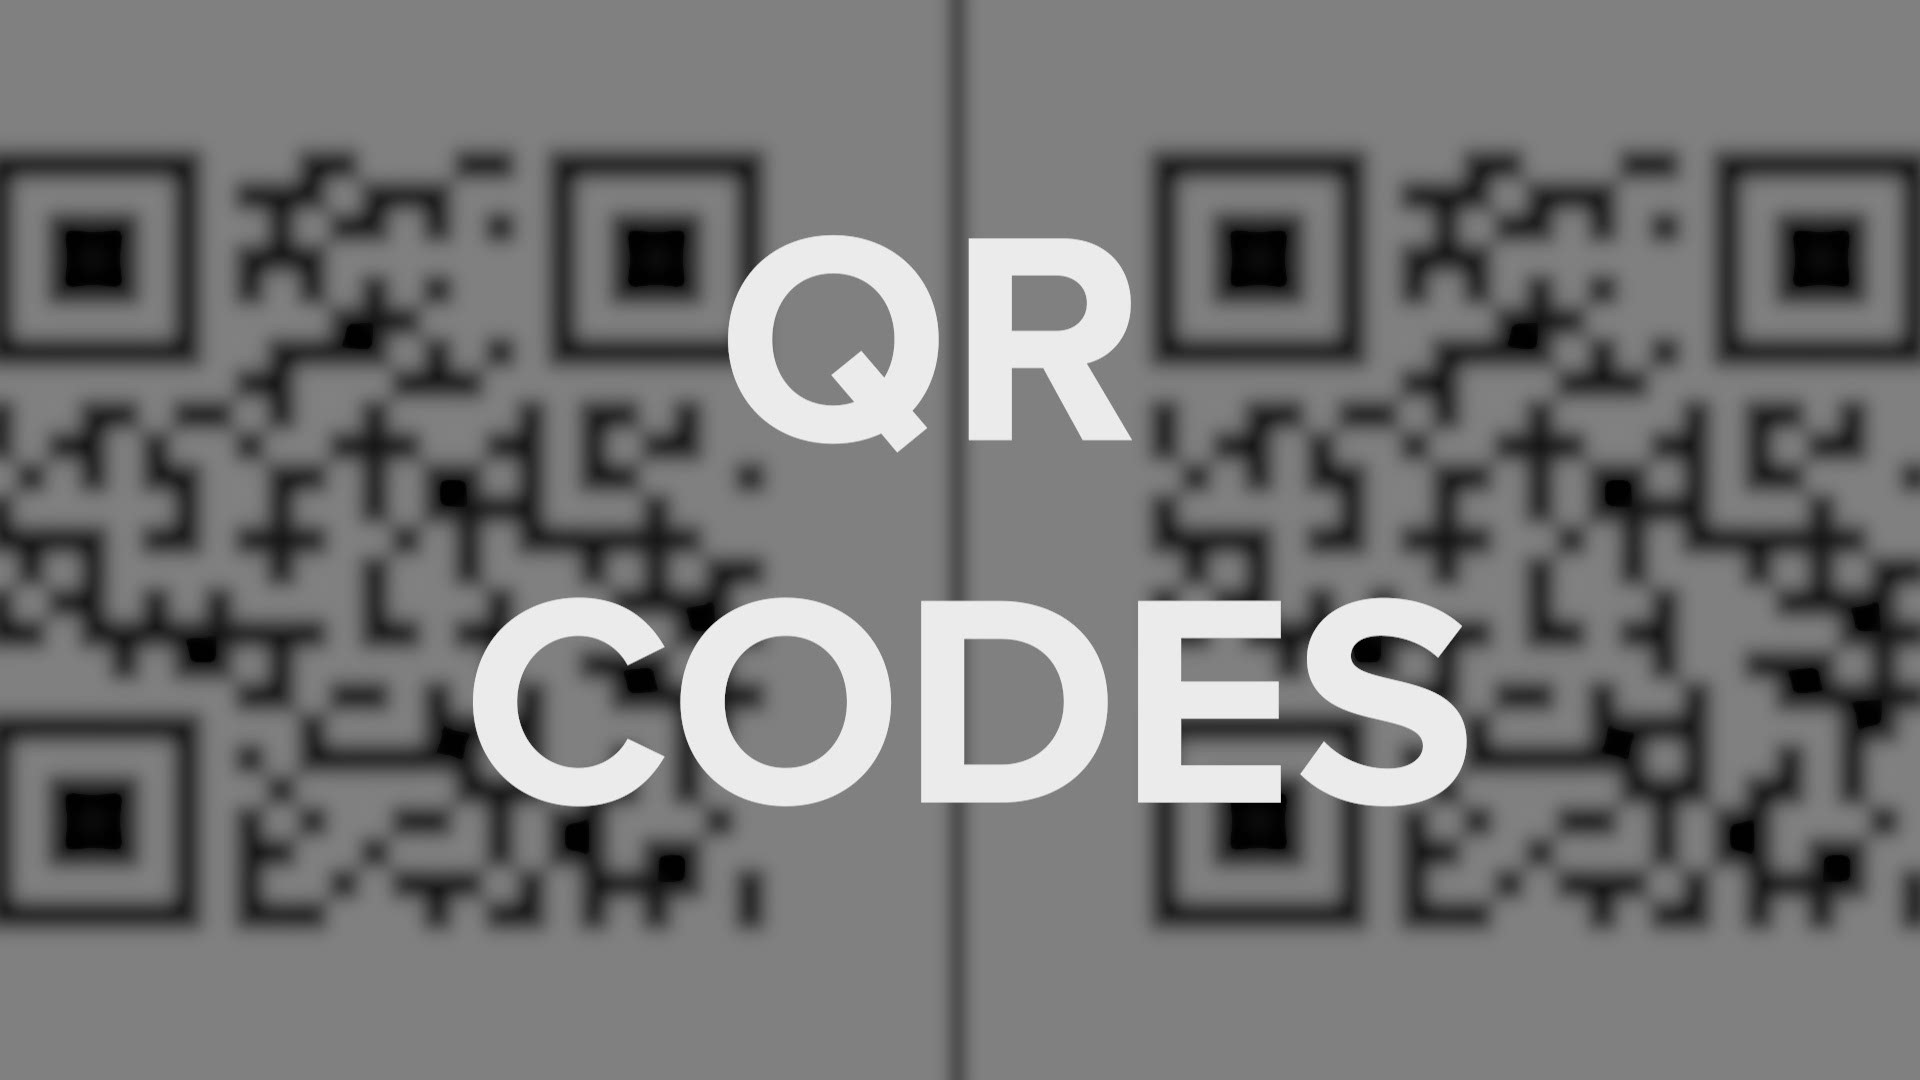 Despite how safe people feel, industry experts say it is important to keep an eye out for fraudulent QR codes.